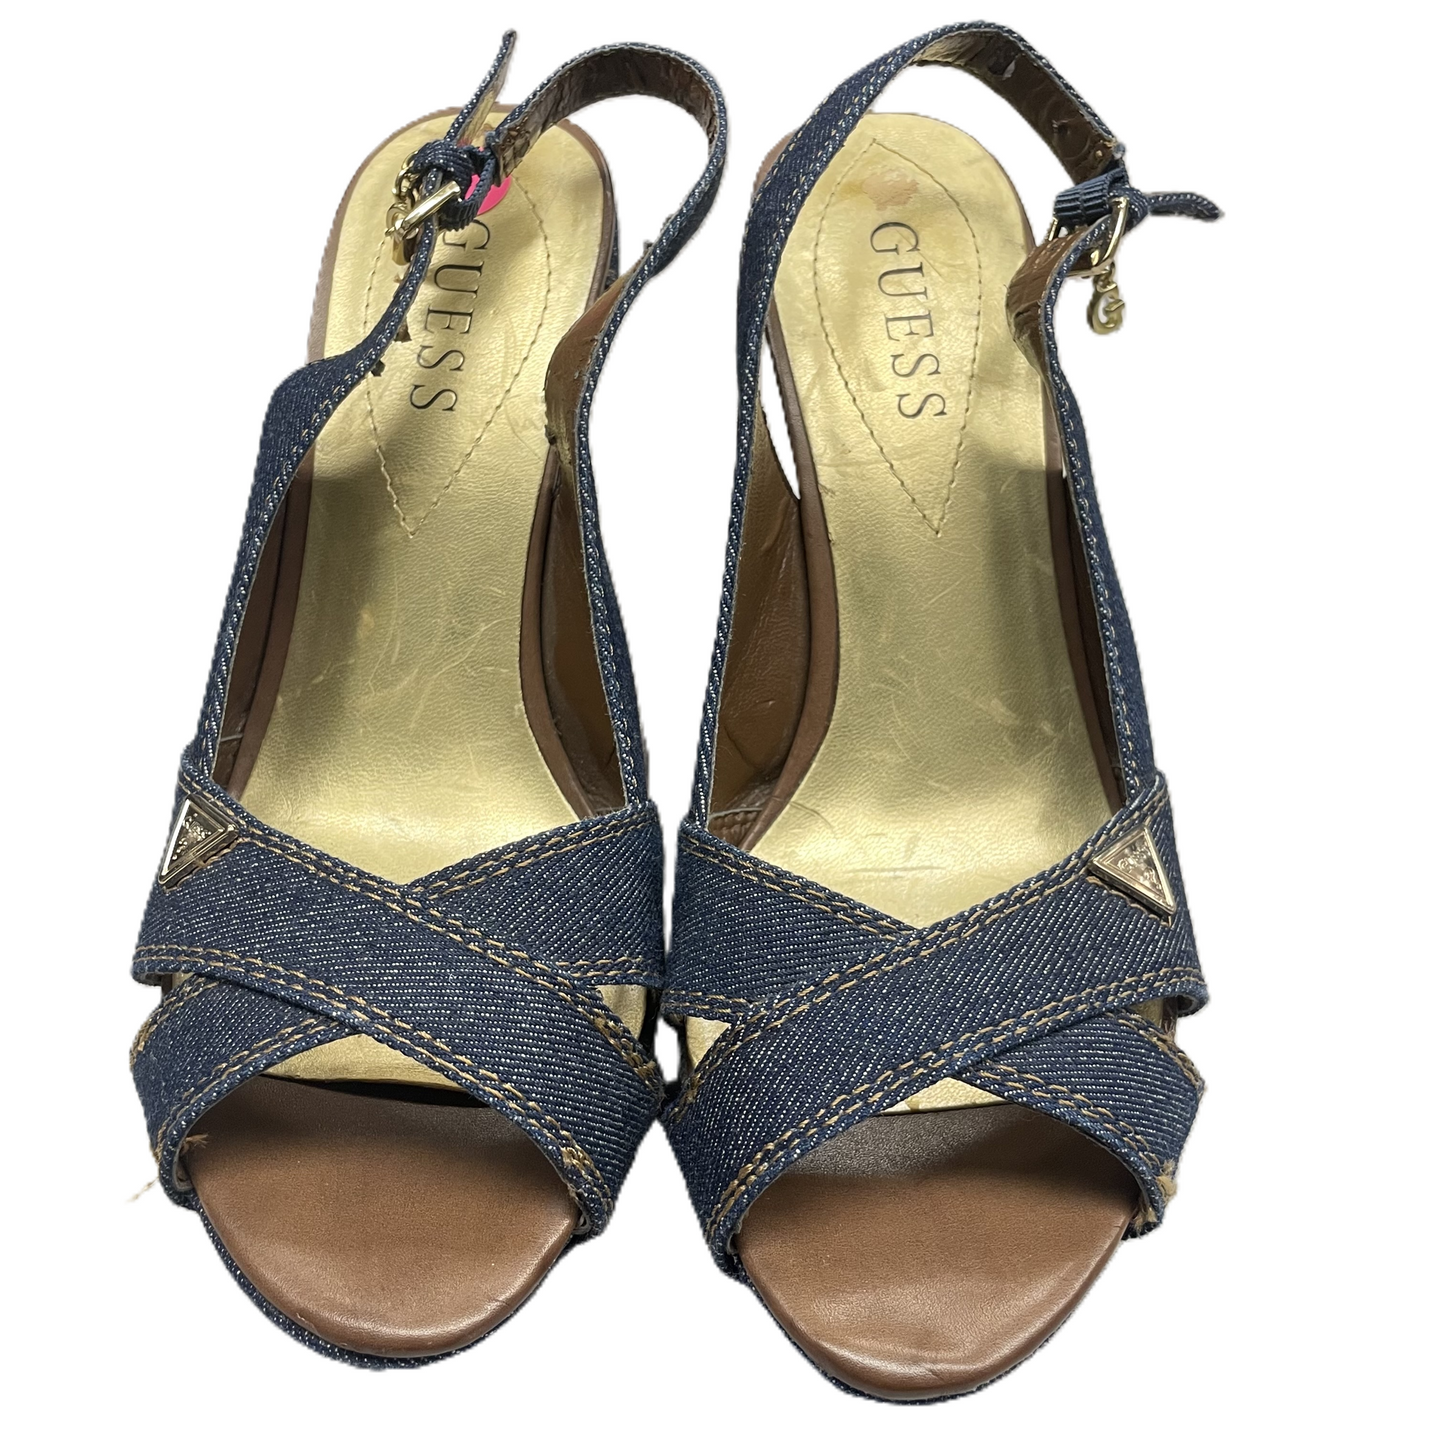 Sandals Heels Wedge By Guess  Size: 7.5